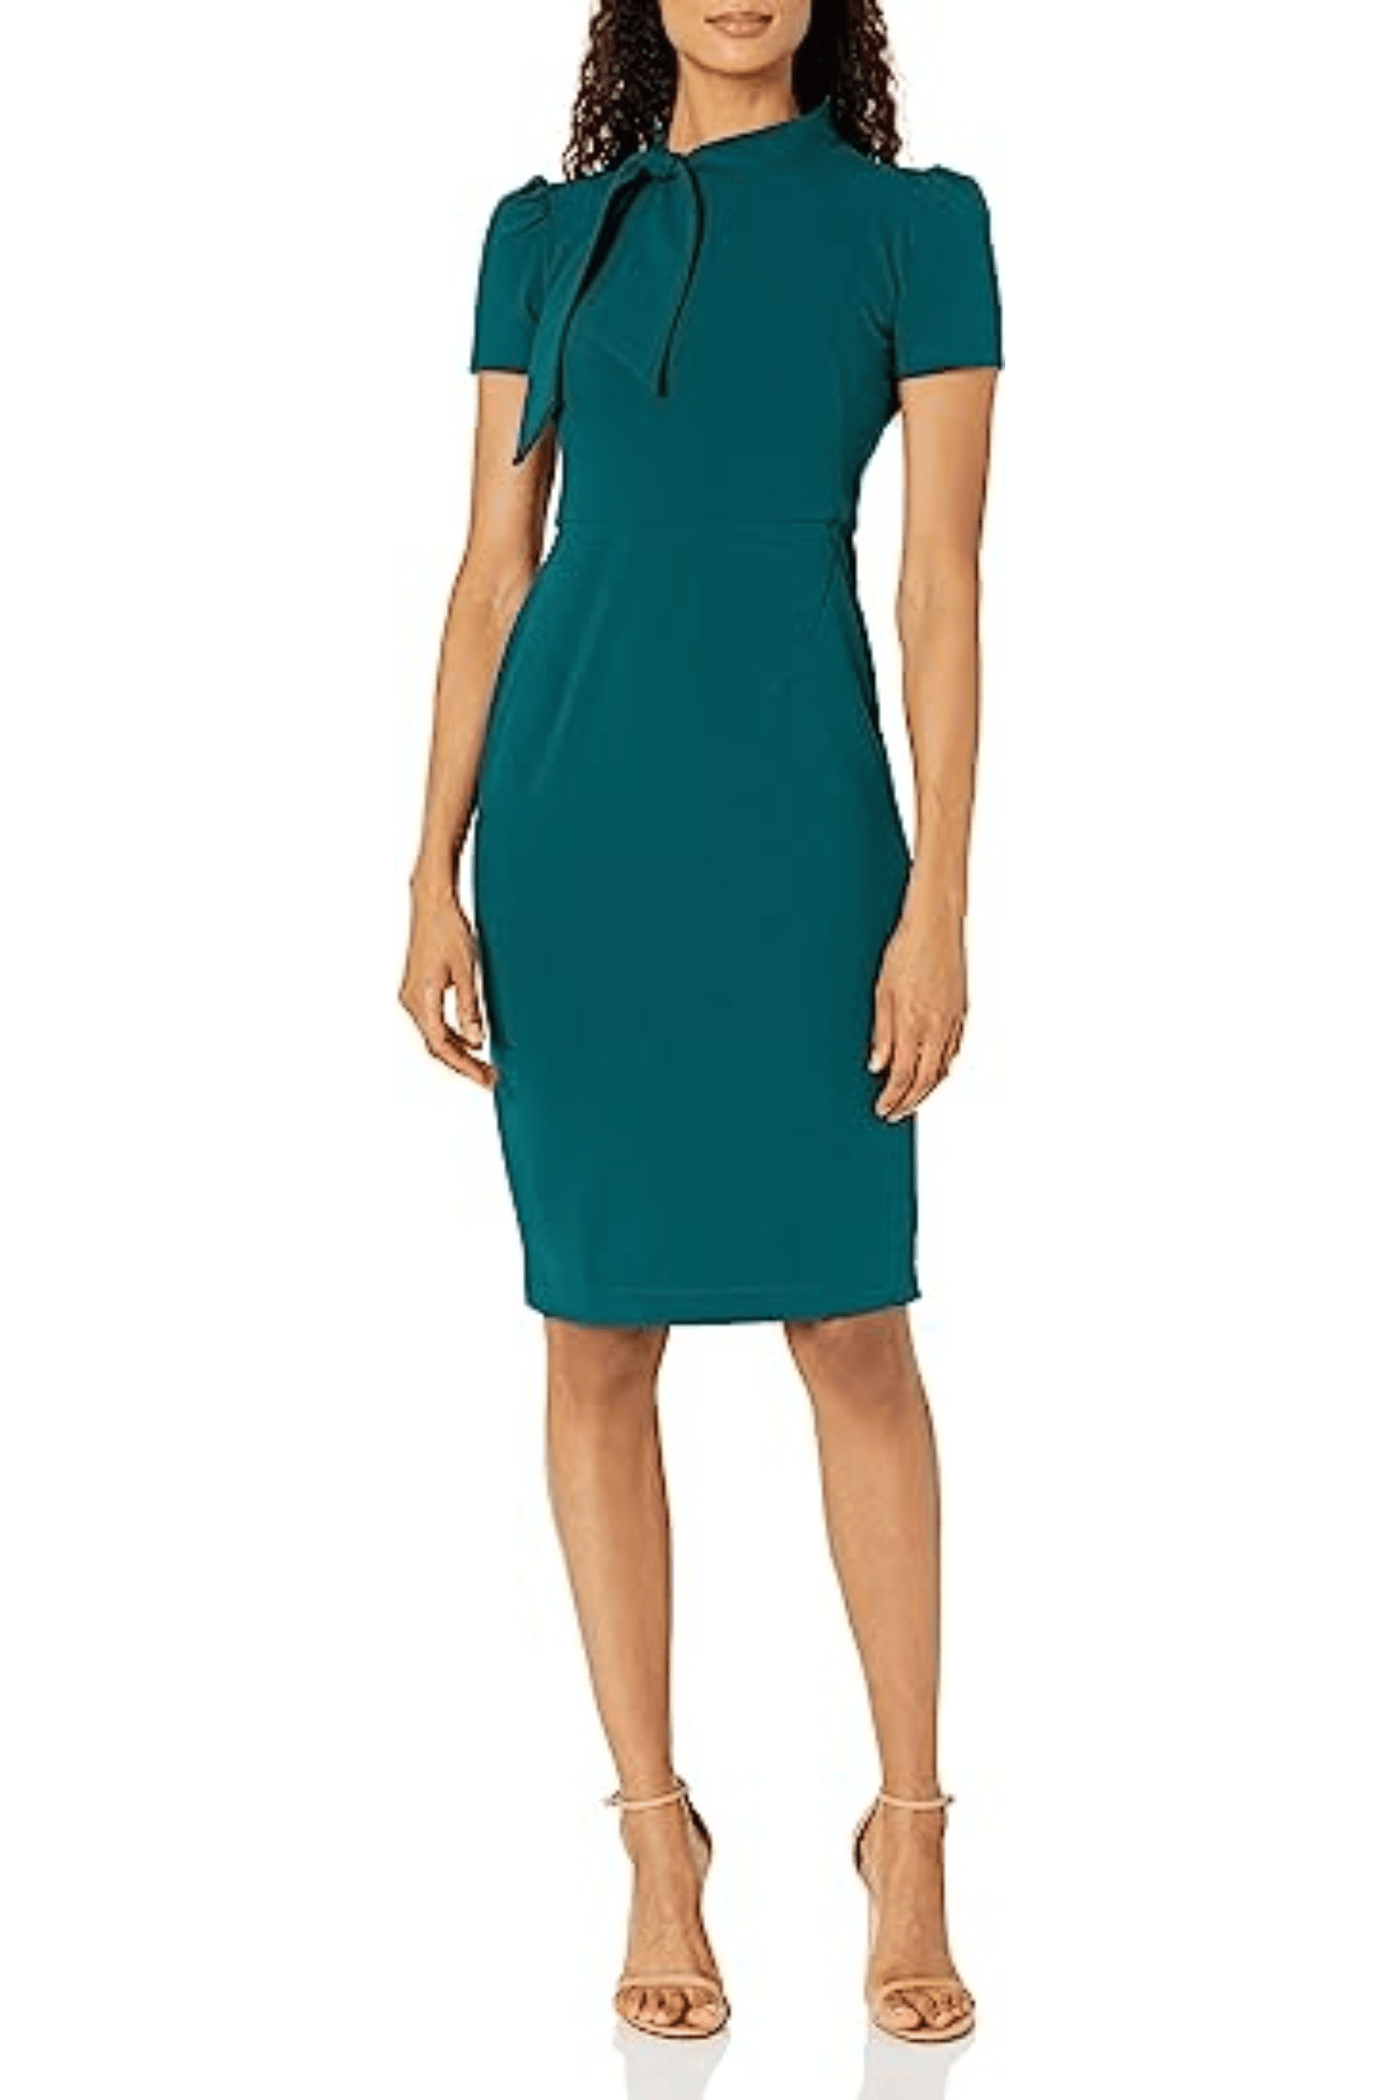 Maggy London G3779M - Tie Neck Sheath Dress Special Occasion Dresses